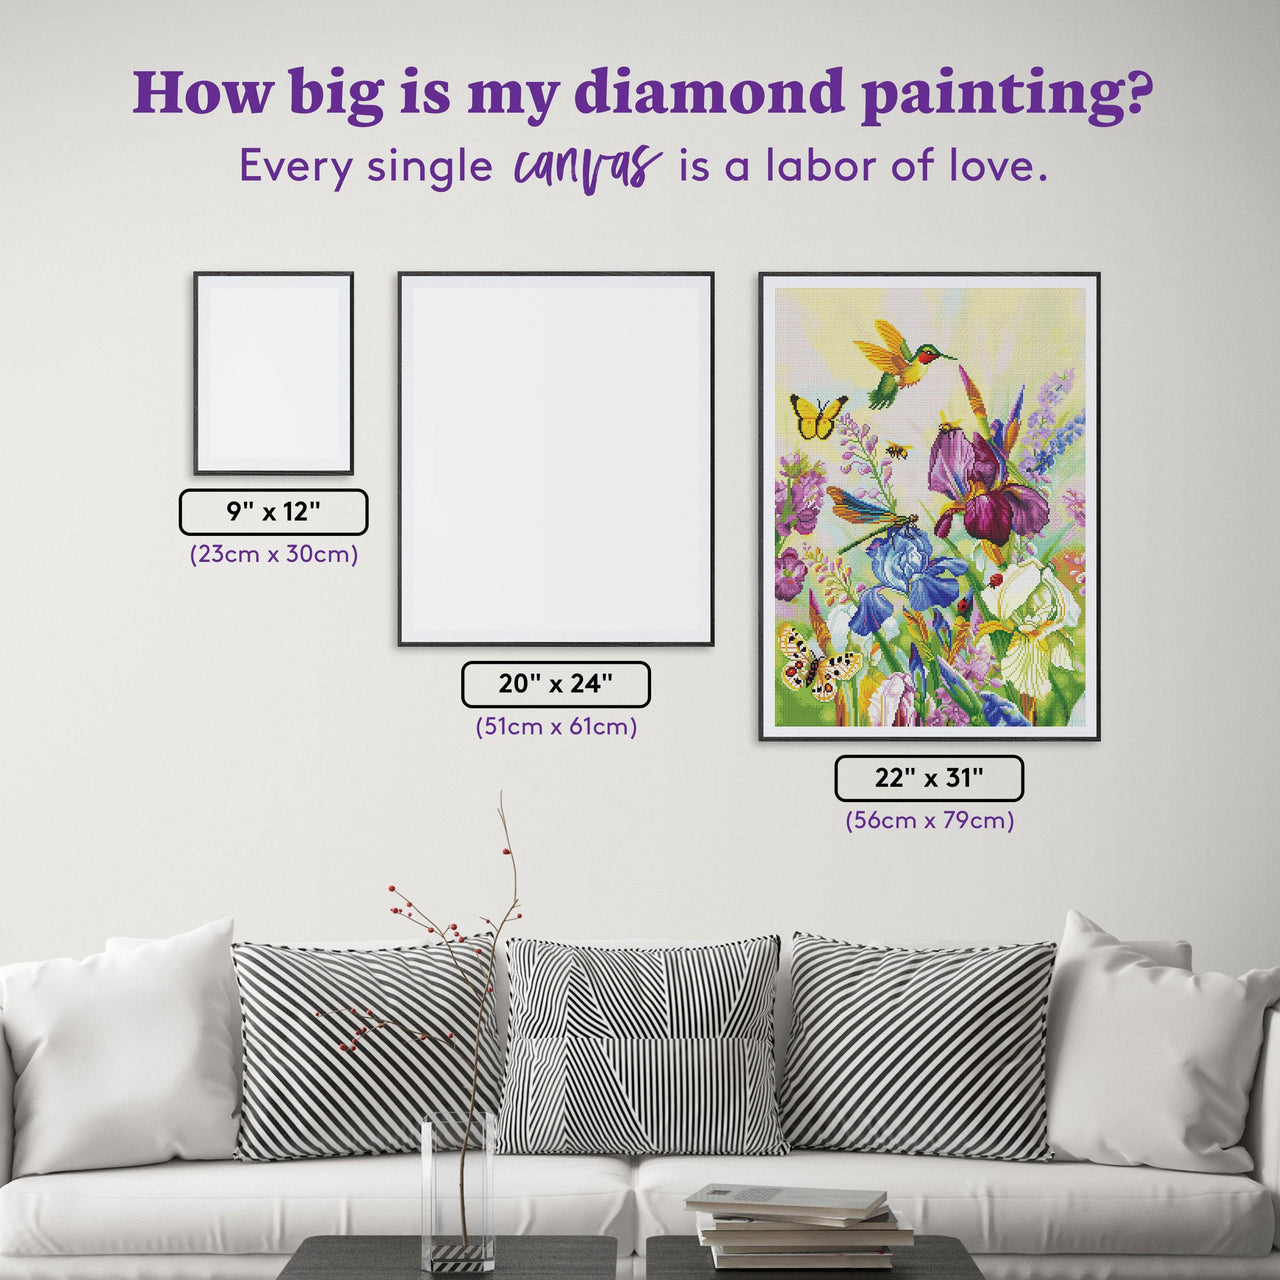 Diamond Painting Dragonflies and Hummingbirds 22" x 31" (56cm x 79cm) / Round with 59 Colors including 4 ABs / 55,919